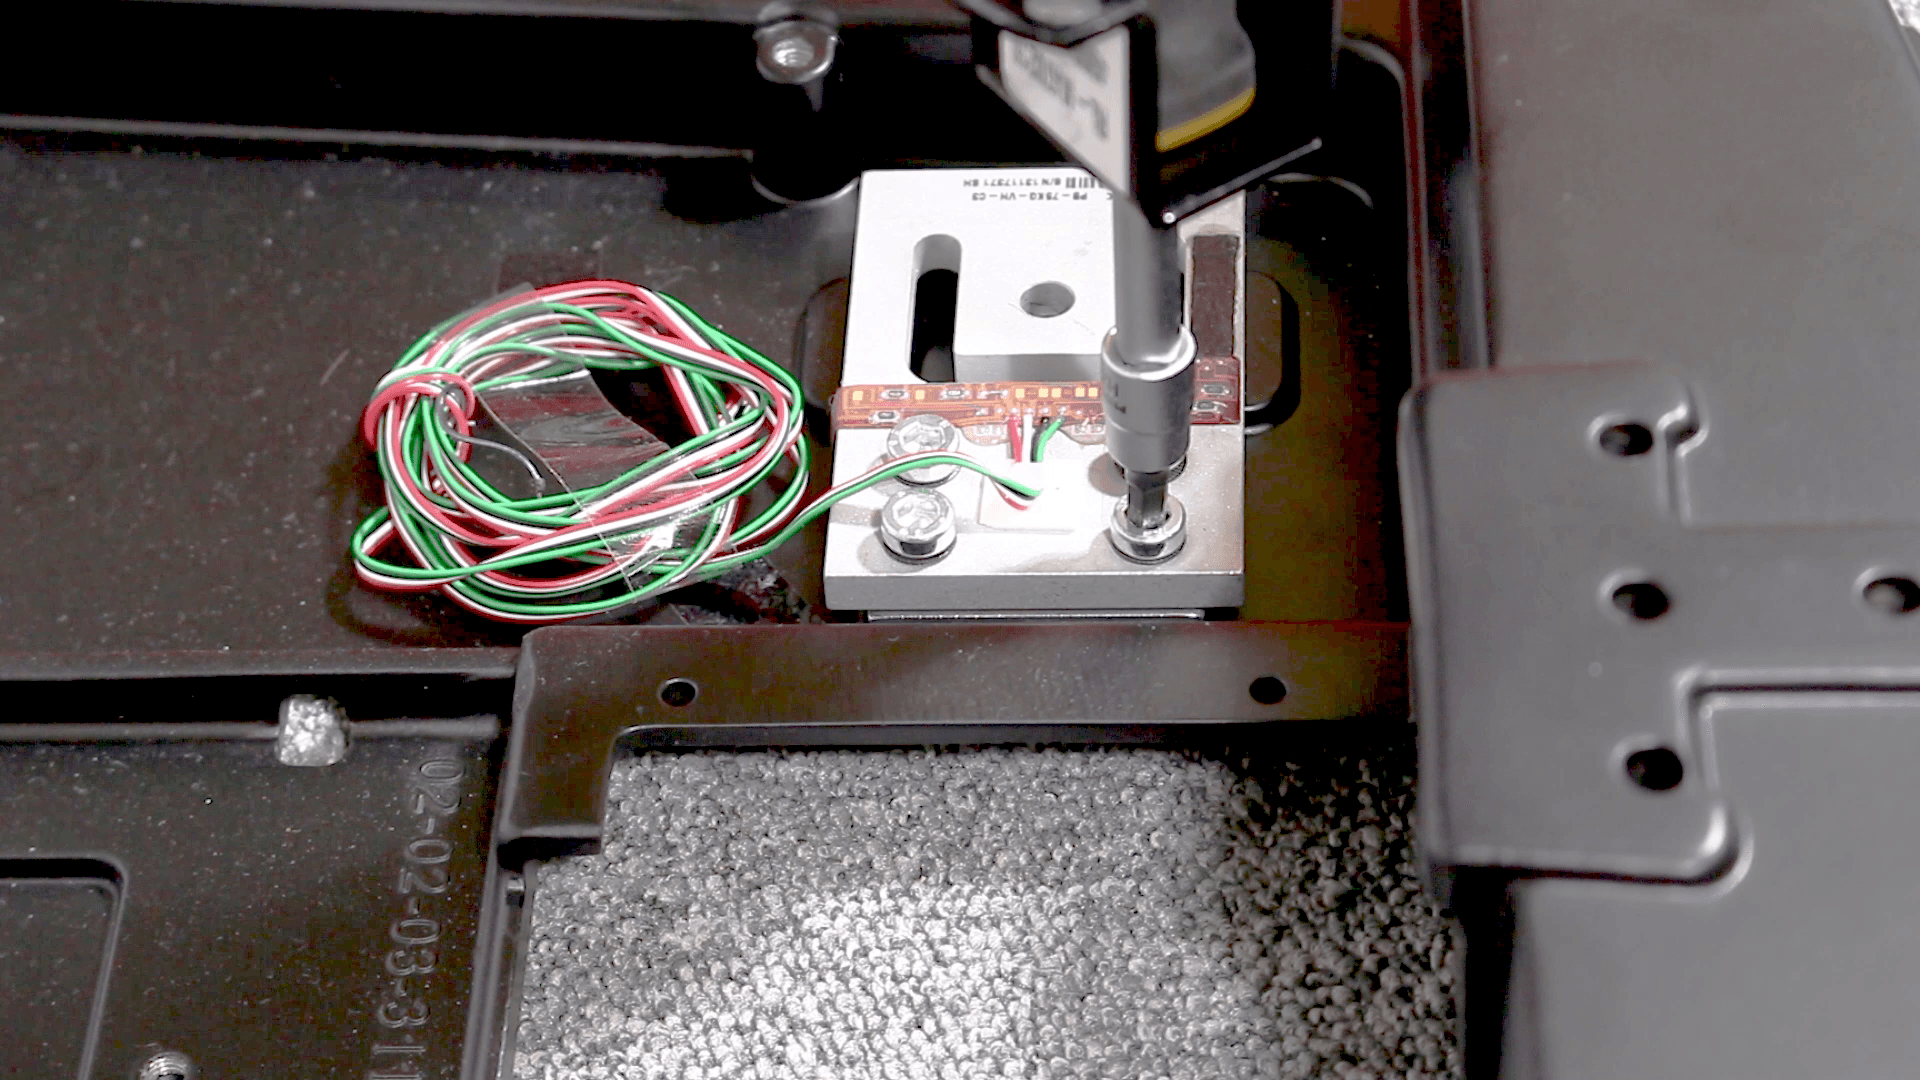 Screwing application with an igus Robolink